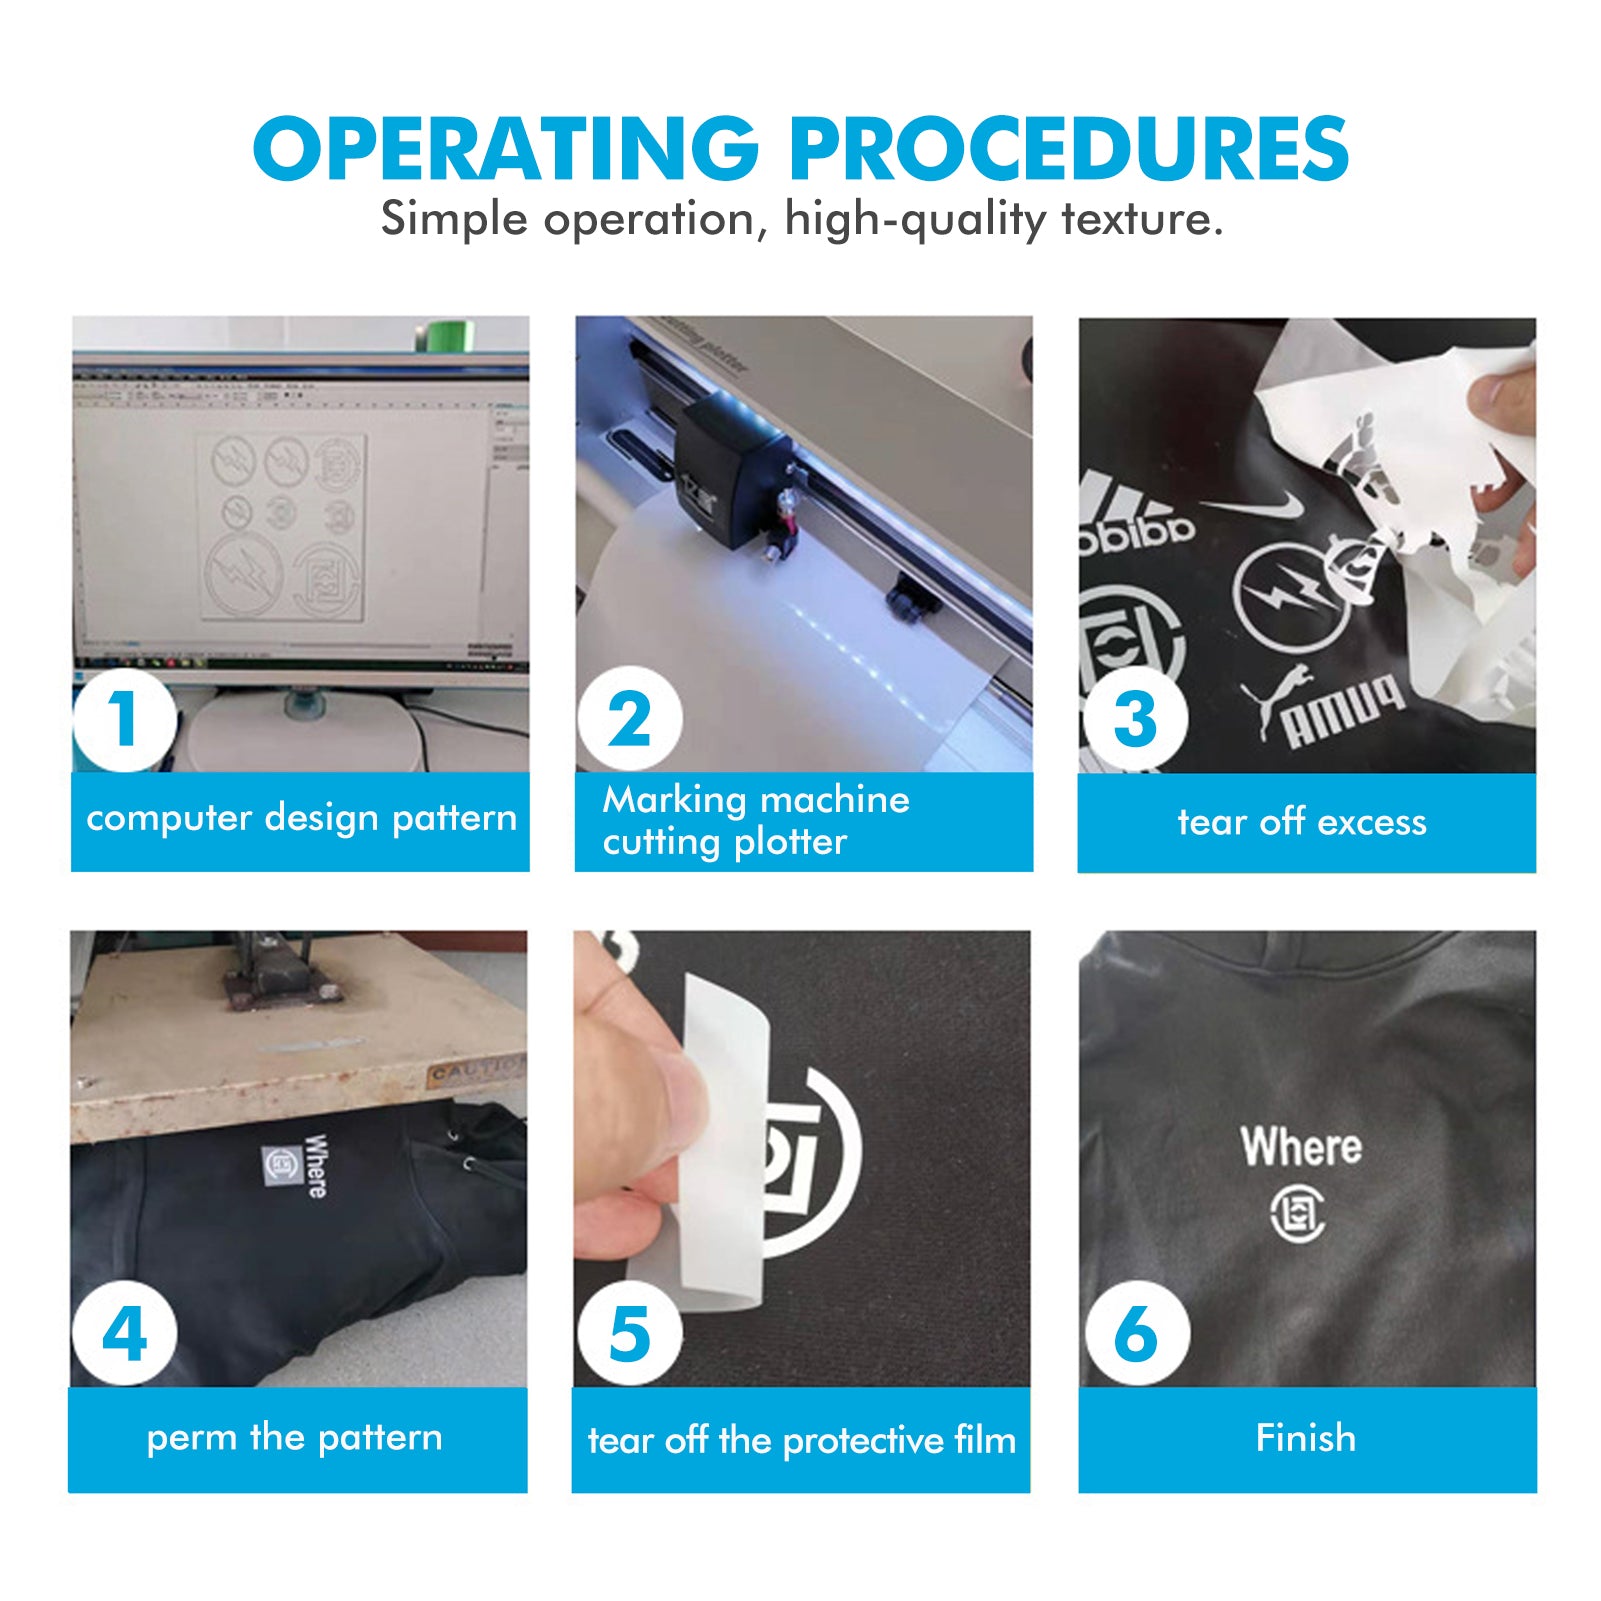 Instructional image titled "OPERATING PROCEDURES" showing a 6-step process for design transfer using the 10pcs HTV Heat Transfer Vinyl Paper for Falcon Laser Engraving by CrealityFalcon:
1. Design pattern on computer.
2. Machine cuts pattern.
3. Tear off excess material.
4. Apply pattern to material.
5. Remove protective film.
6. Finished product displaying "Where".